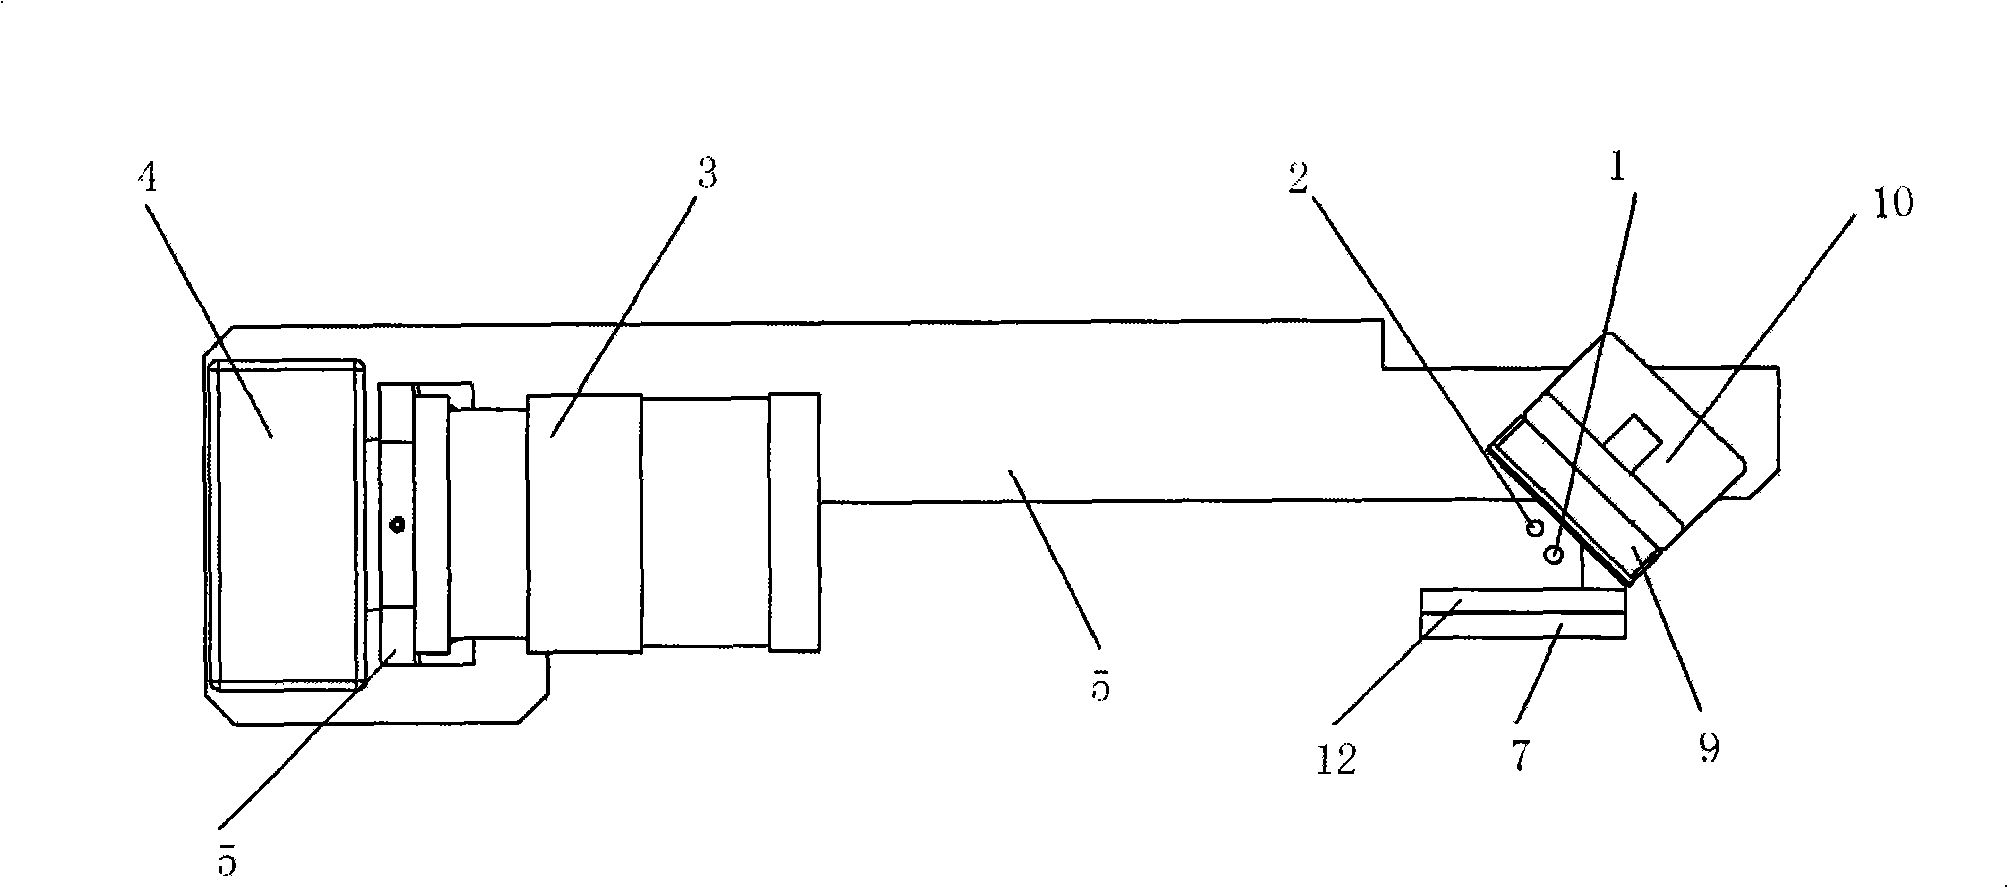 Imaging system for component axial centering detection apparatus